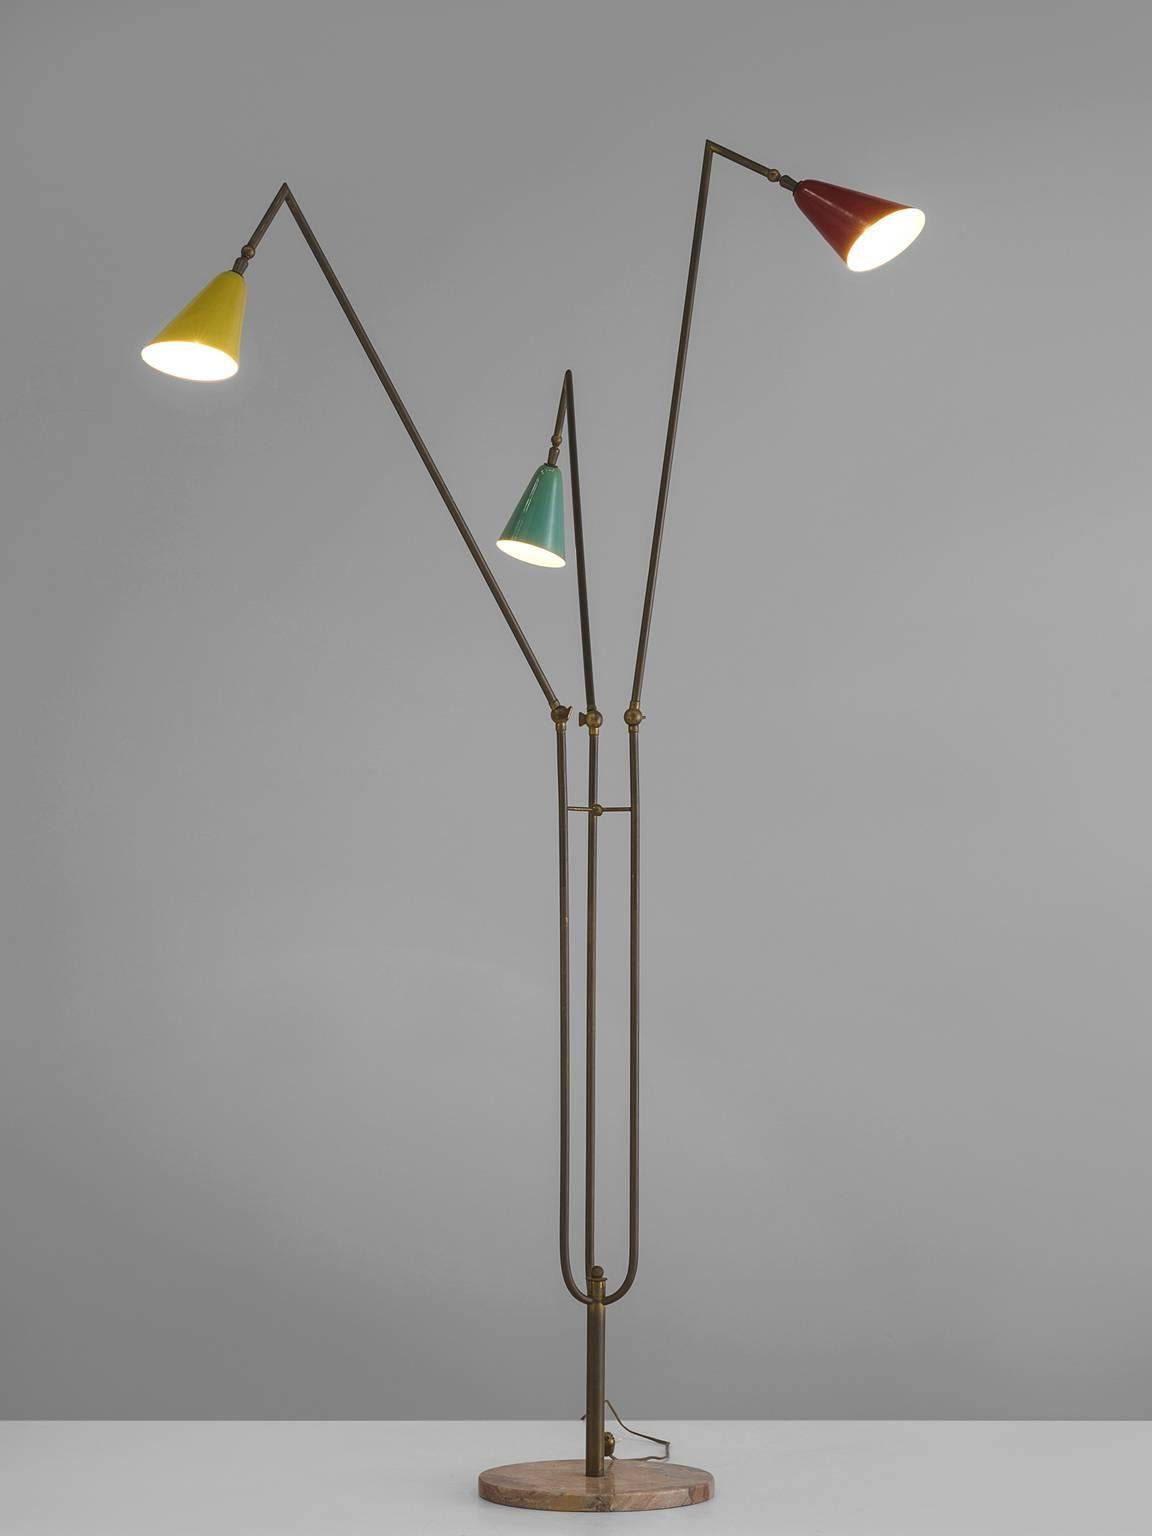 Floor lamp with colored shades in green, yellow and red metal, brass and marble, Italy, 1950s.

This floor lamp is built up of one pedestal pink marble foot from which one brass stem arises that sprout into three arms. The arms each end in a metal